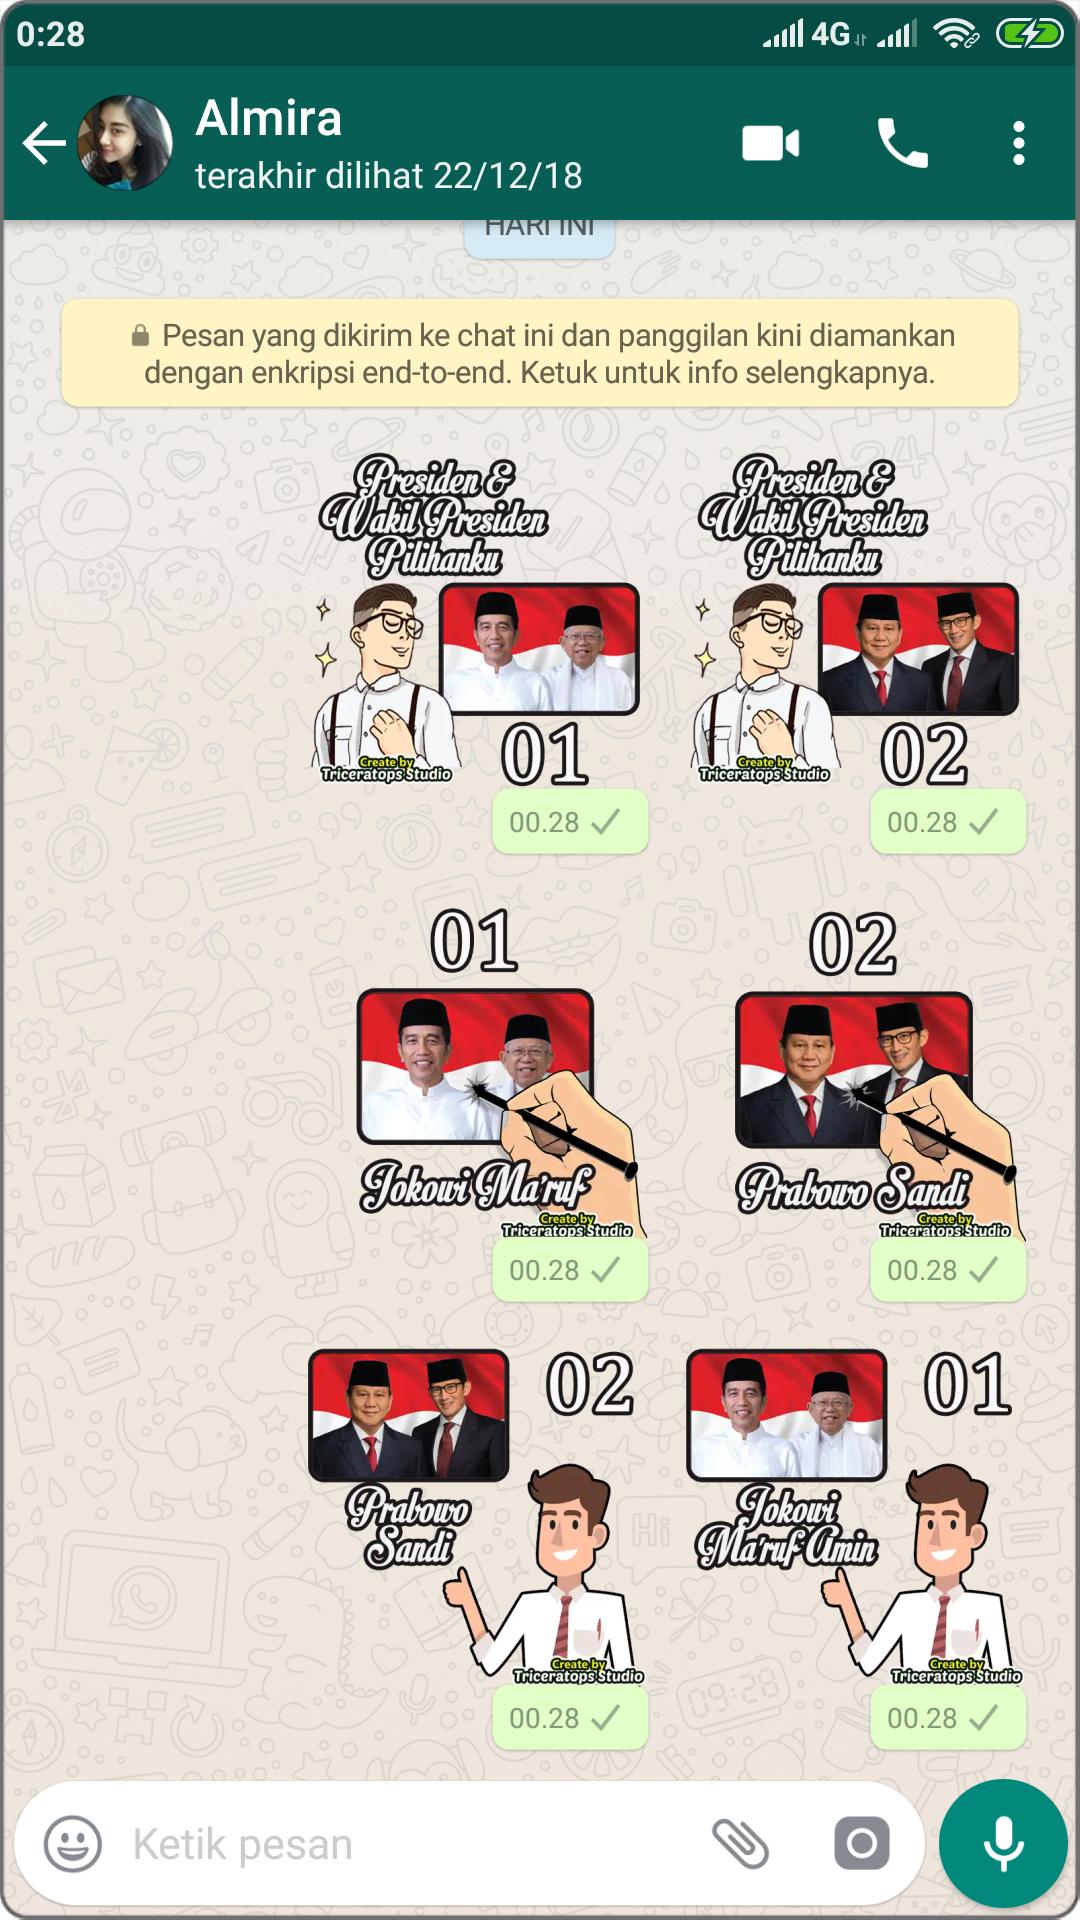 Stiker Pemilu 2019 For Android Apk Download